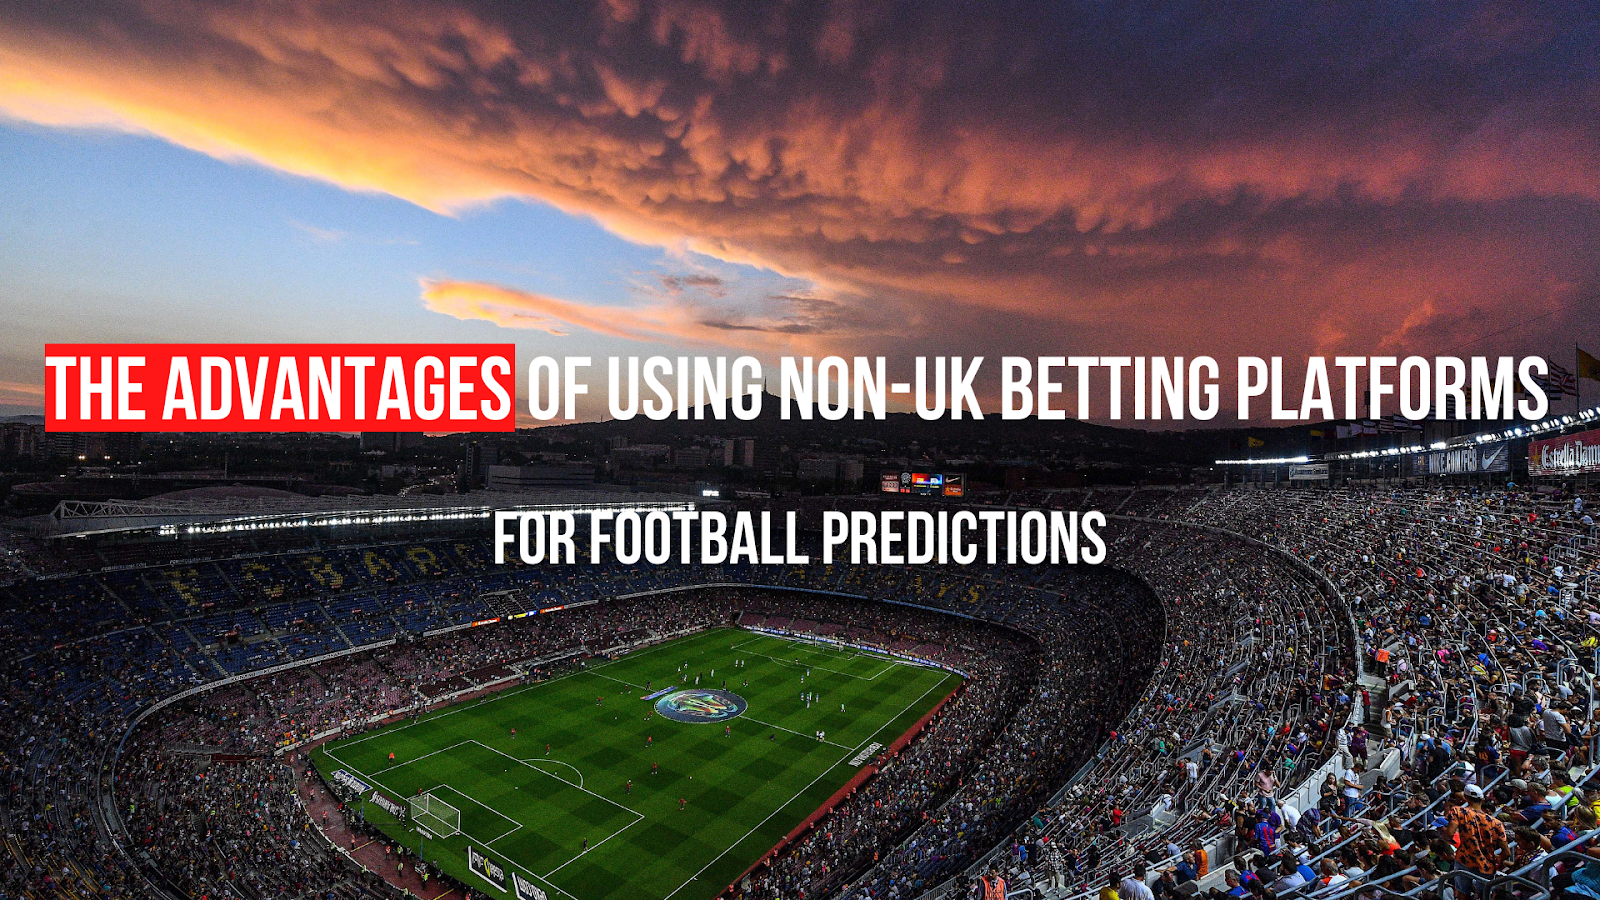 The Advantages of Using Non-UK Betting Platforms for Football Predictions